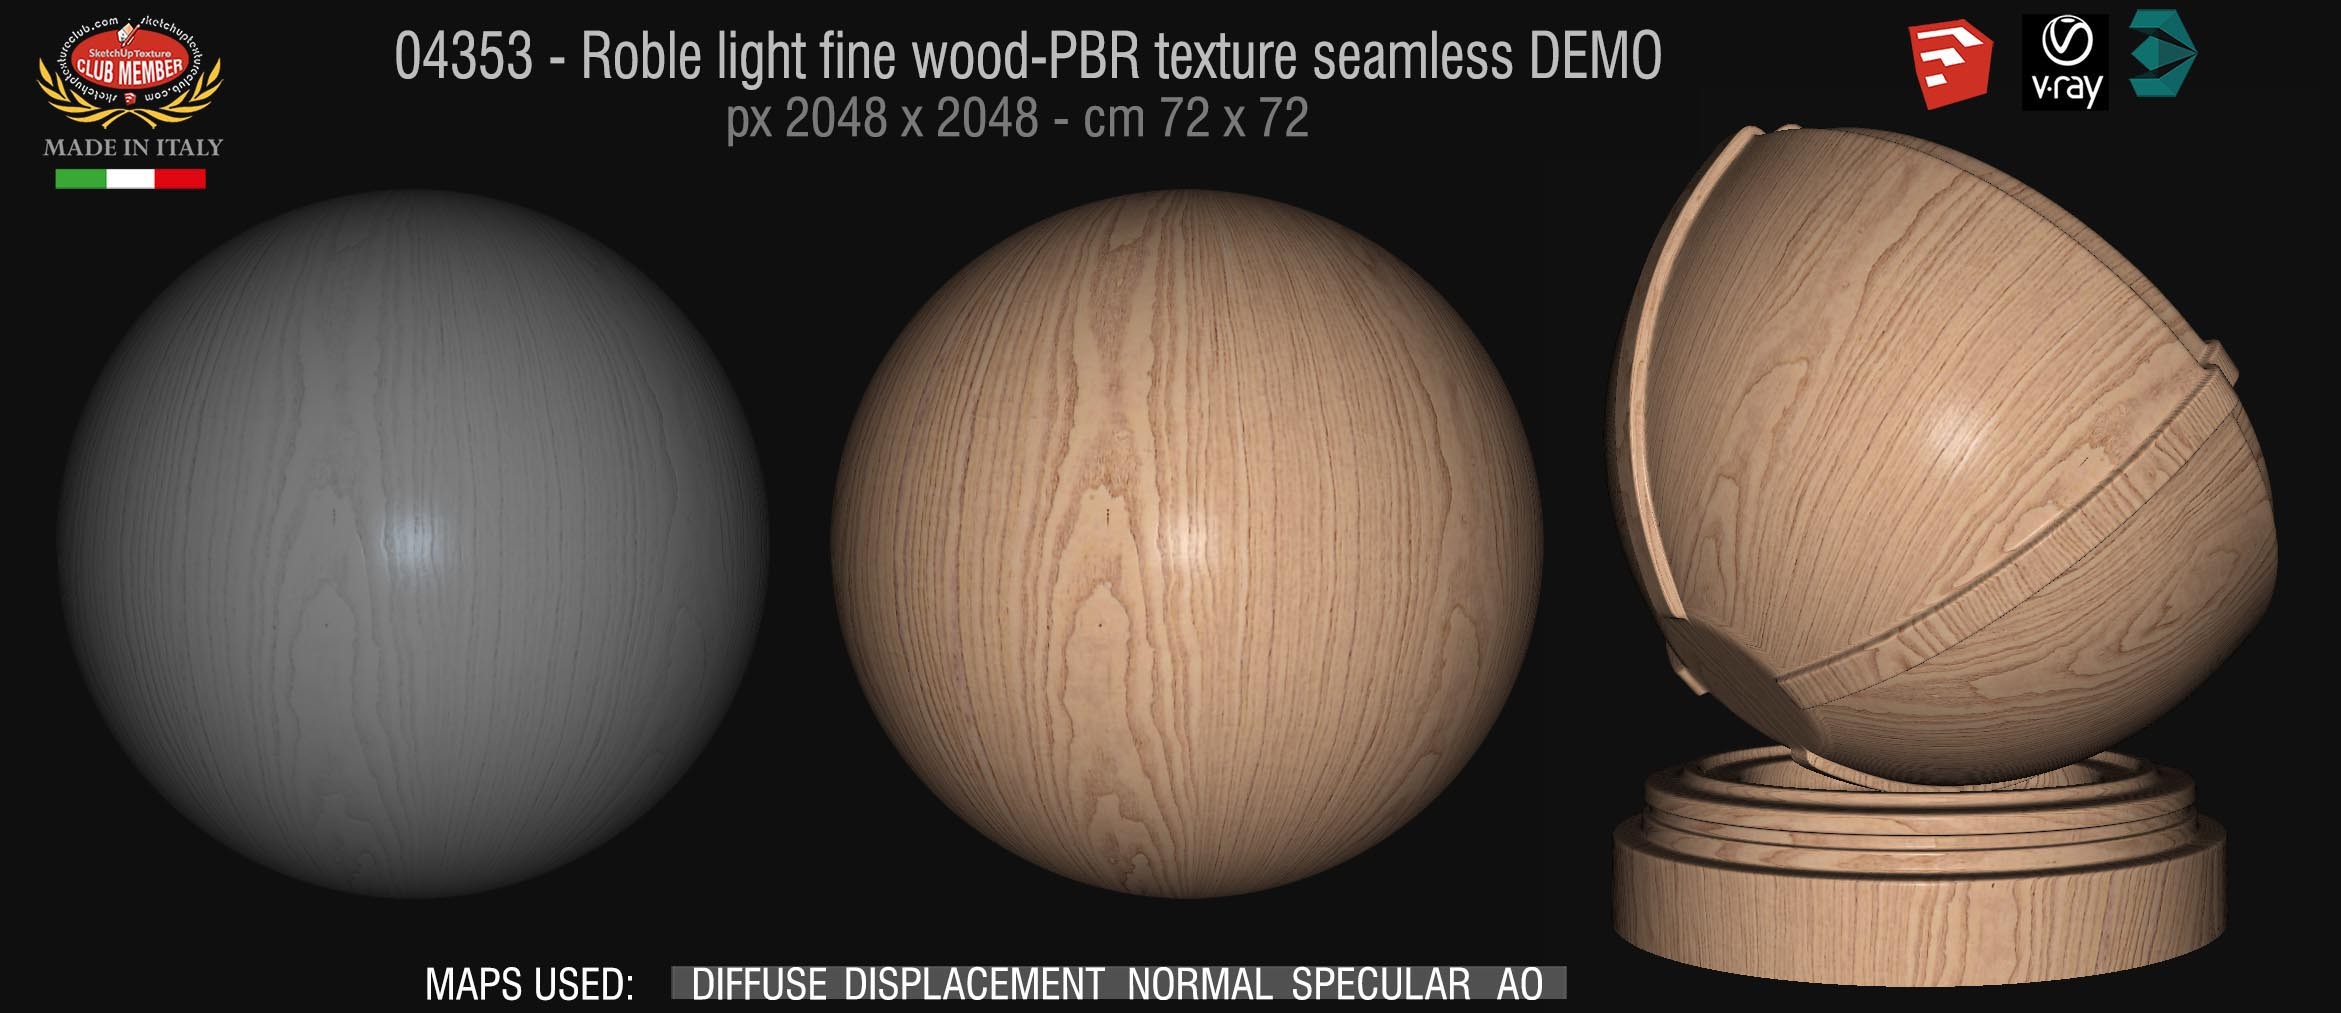 04353 Roble light fine wood-PBR texture seamless DEMO